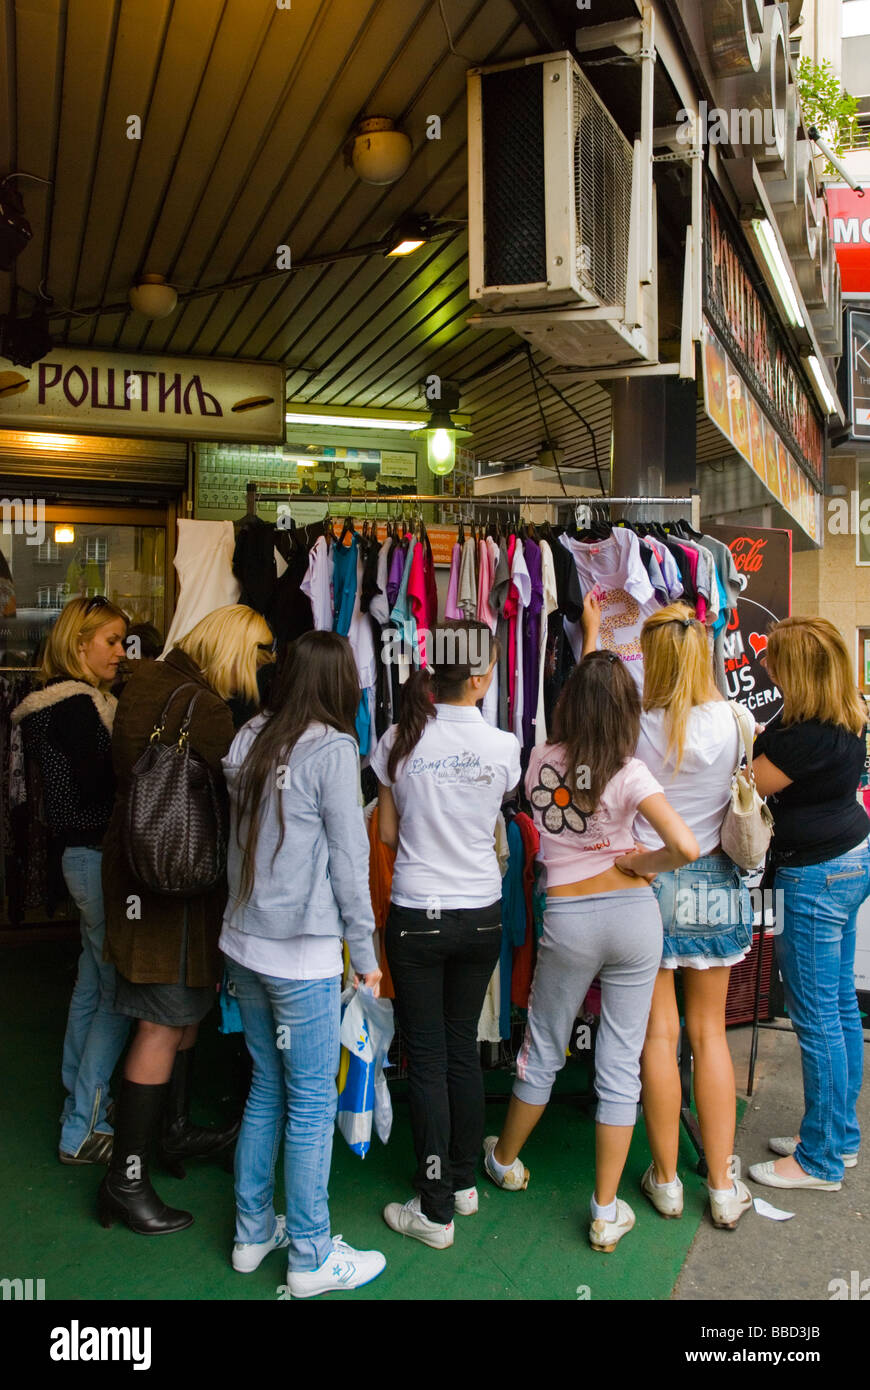 https://c8.alamy.com/comp/BBD3JB/women-shopping-for-cheap-clothes-in-central-belgrade-serbia-europe-BBD3JB.jpg